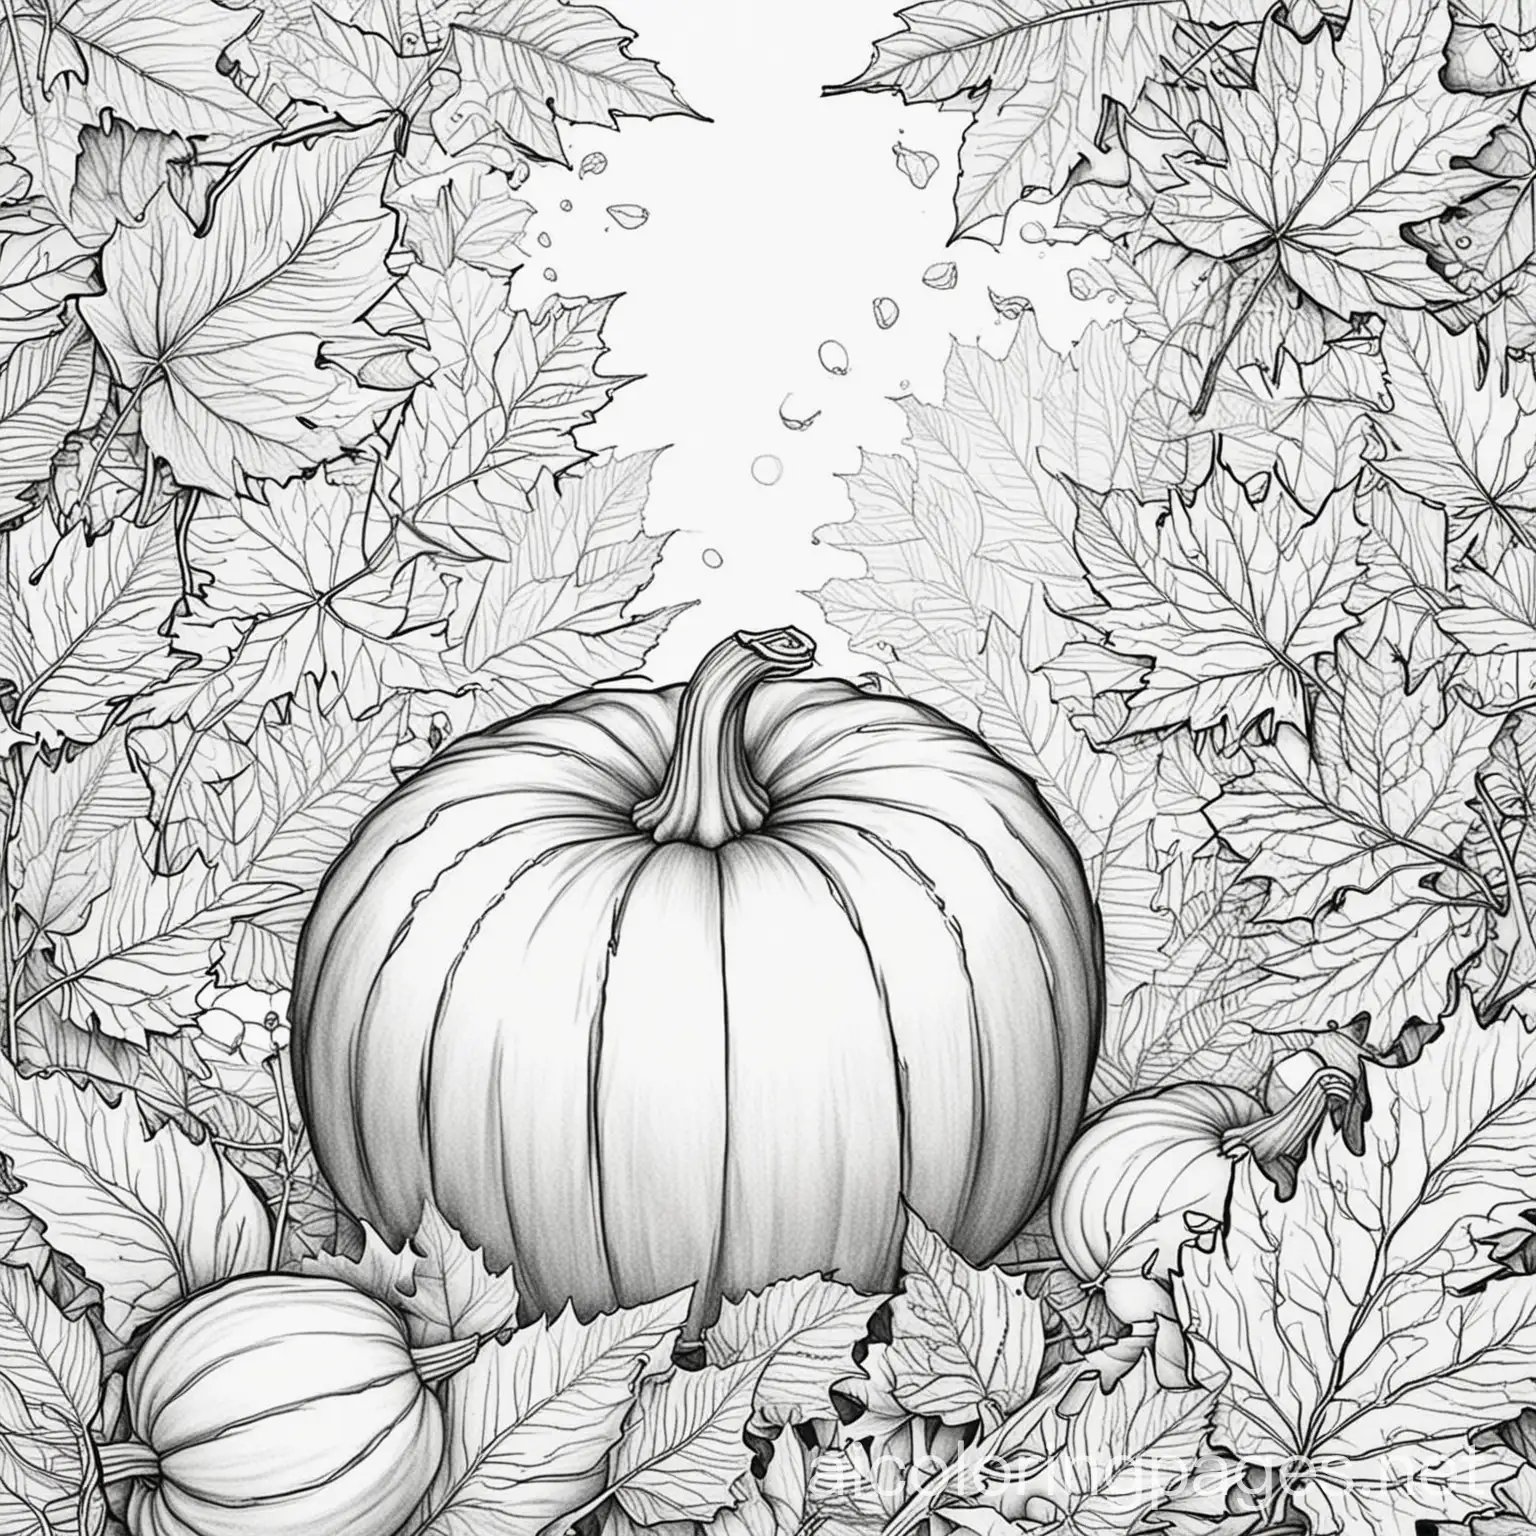 copyright free autmn background for coloring for kids without people more pumpkins and autmn leaves, Coloring Page, black and white, line art, white background, Simplicity, Ample White Space. The background of the coloring page is plain white to make it easy for young children to color within the lines. The outlines of all the subjects are easy to distinguish, making it simple for kids to color without too much difficulty